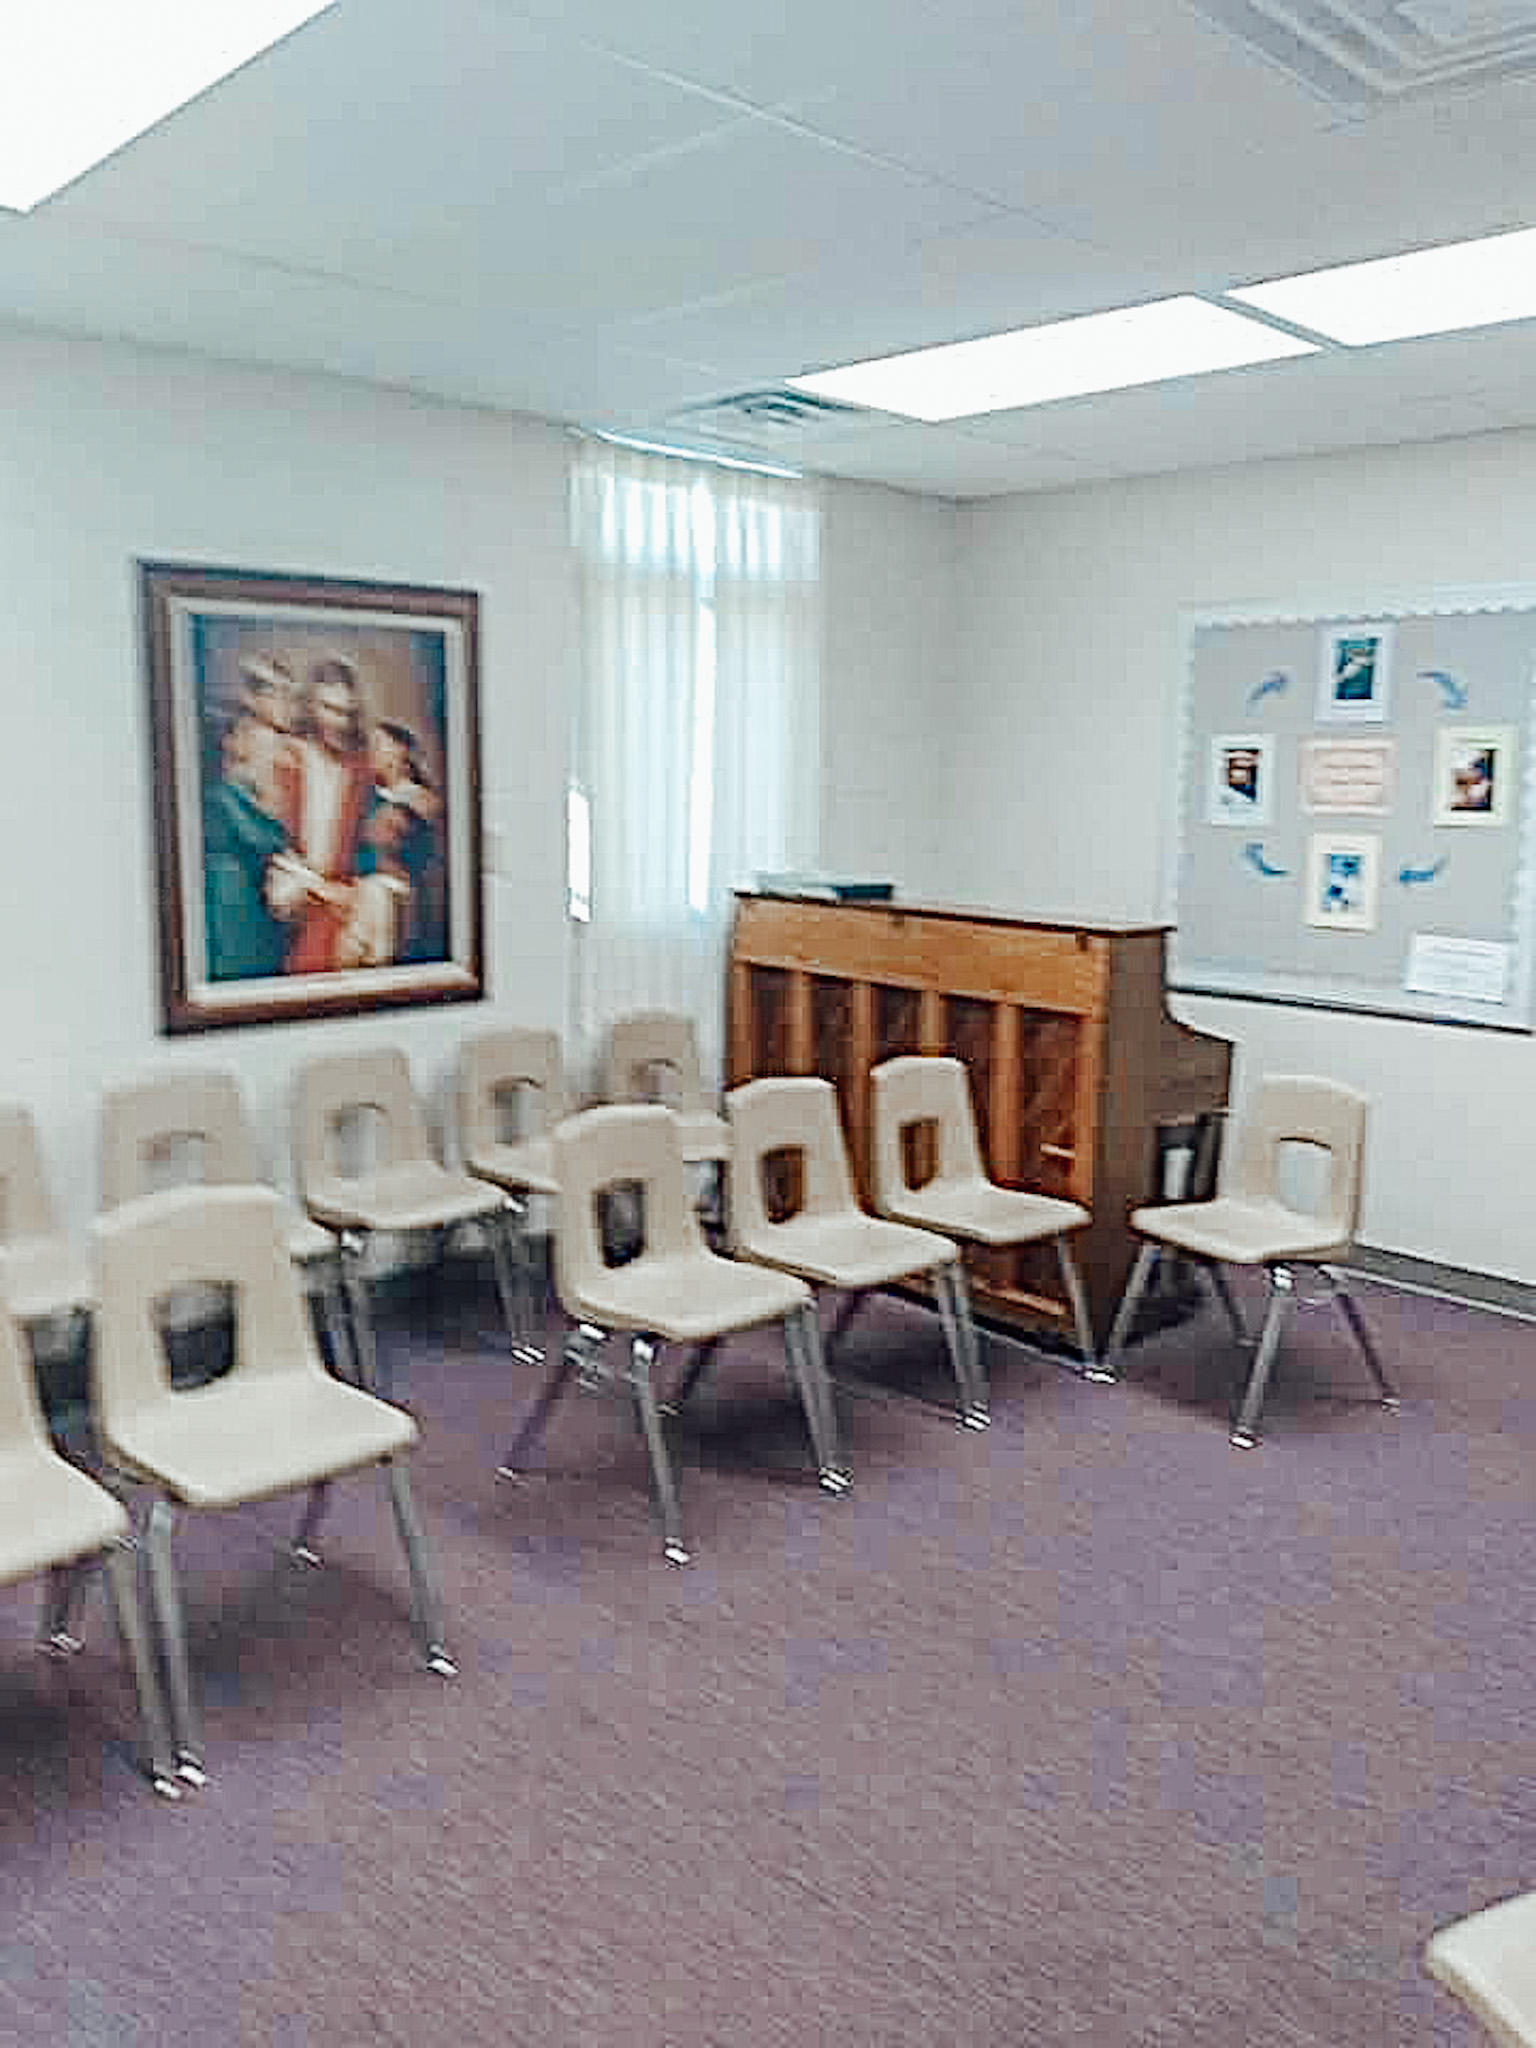 A Sunday school classroom inside the Holdrege building of The Church of Jesus Christ of Latter-Day Saints.